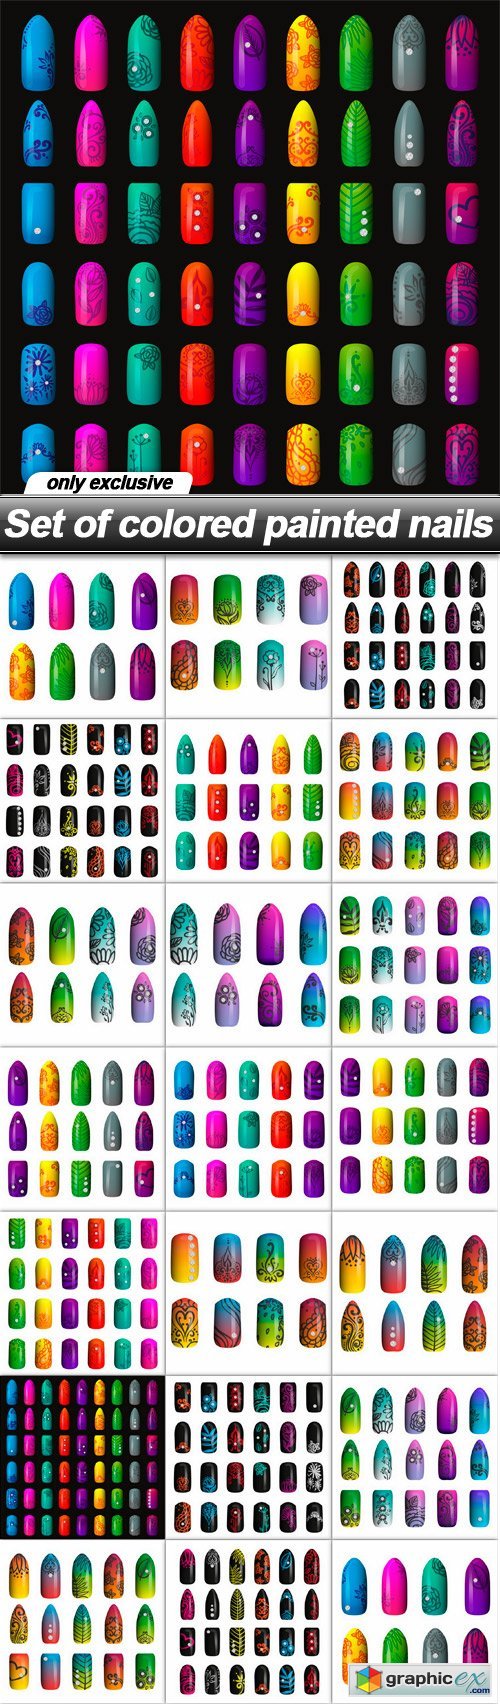 Set of colored painted nails - 20 EPS